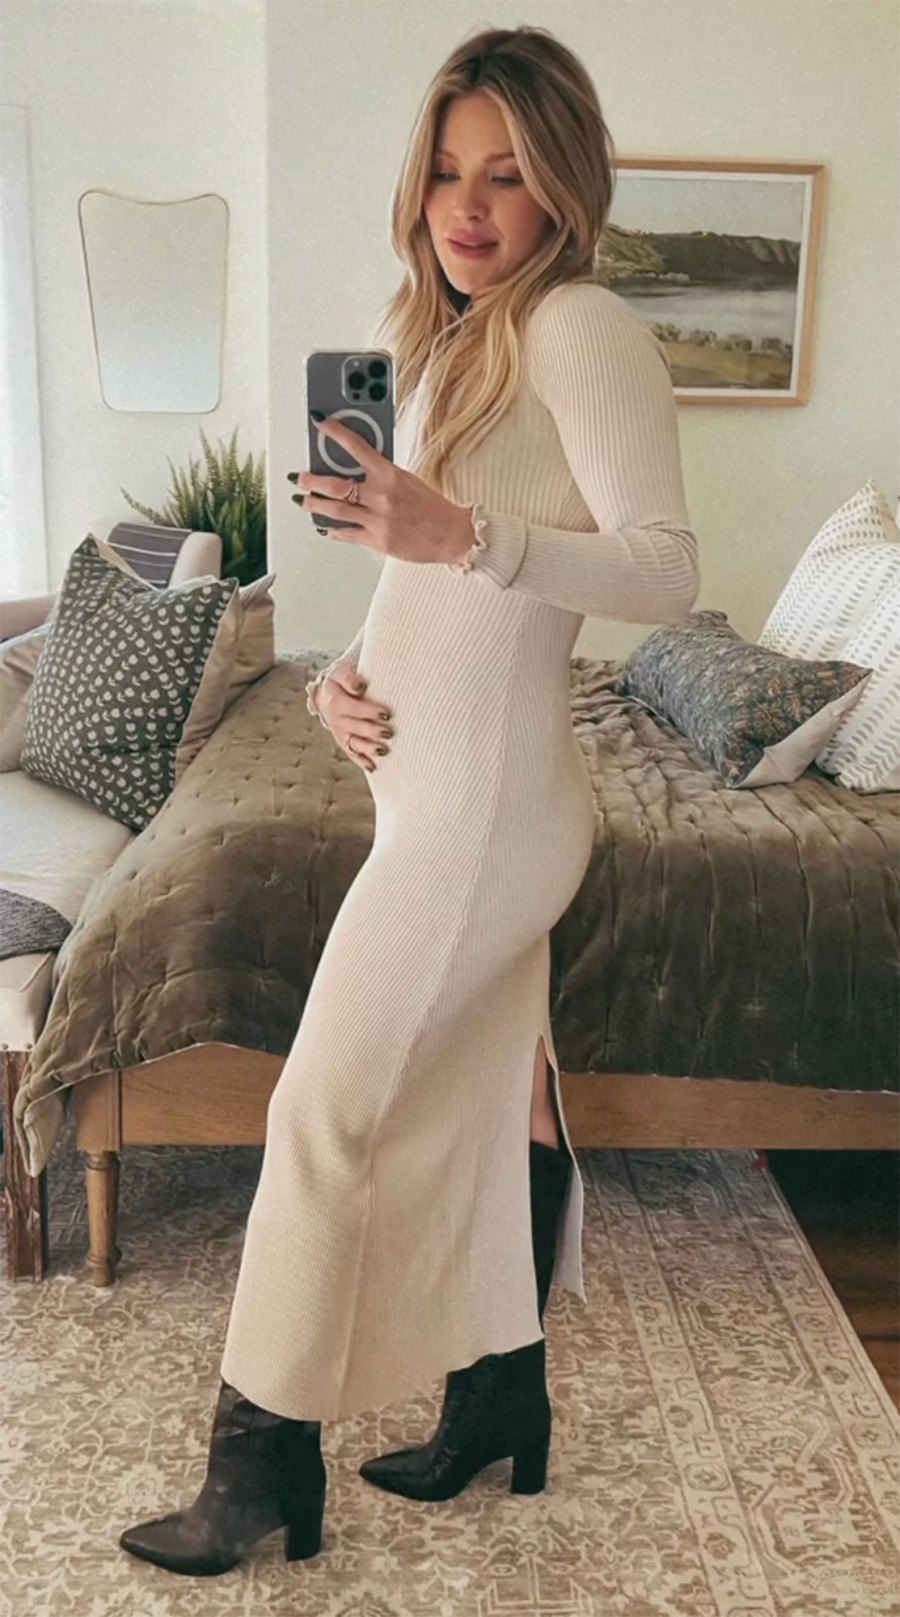 Dancing With the Stars' Witney Carson’s Baby Bump Album Before Welcoming 2nd Child: Pregnancy Pics white maxi dress